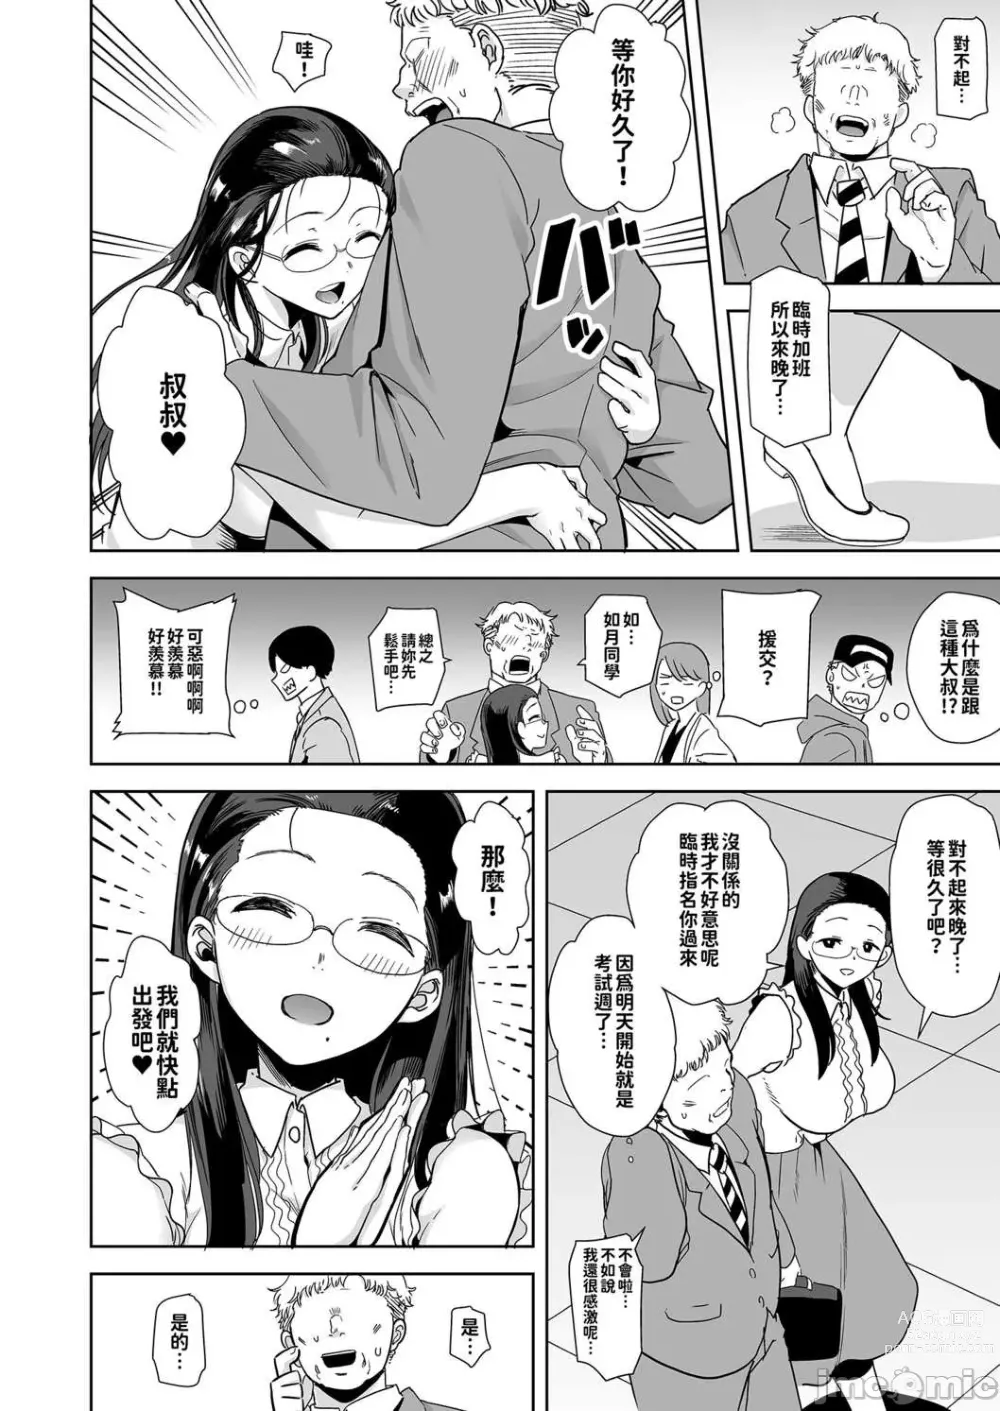 Page 5 of manga Seika Jogakuin High School Official Rod Uncle